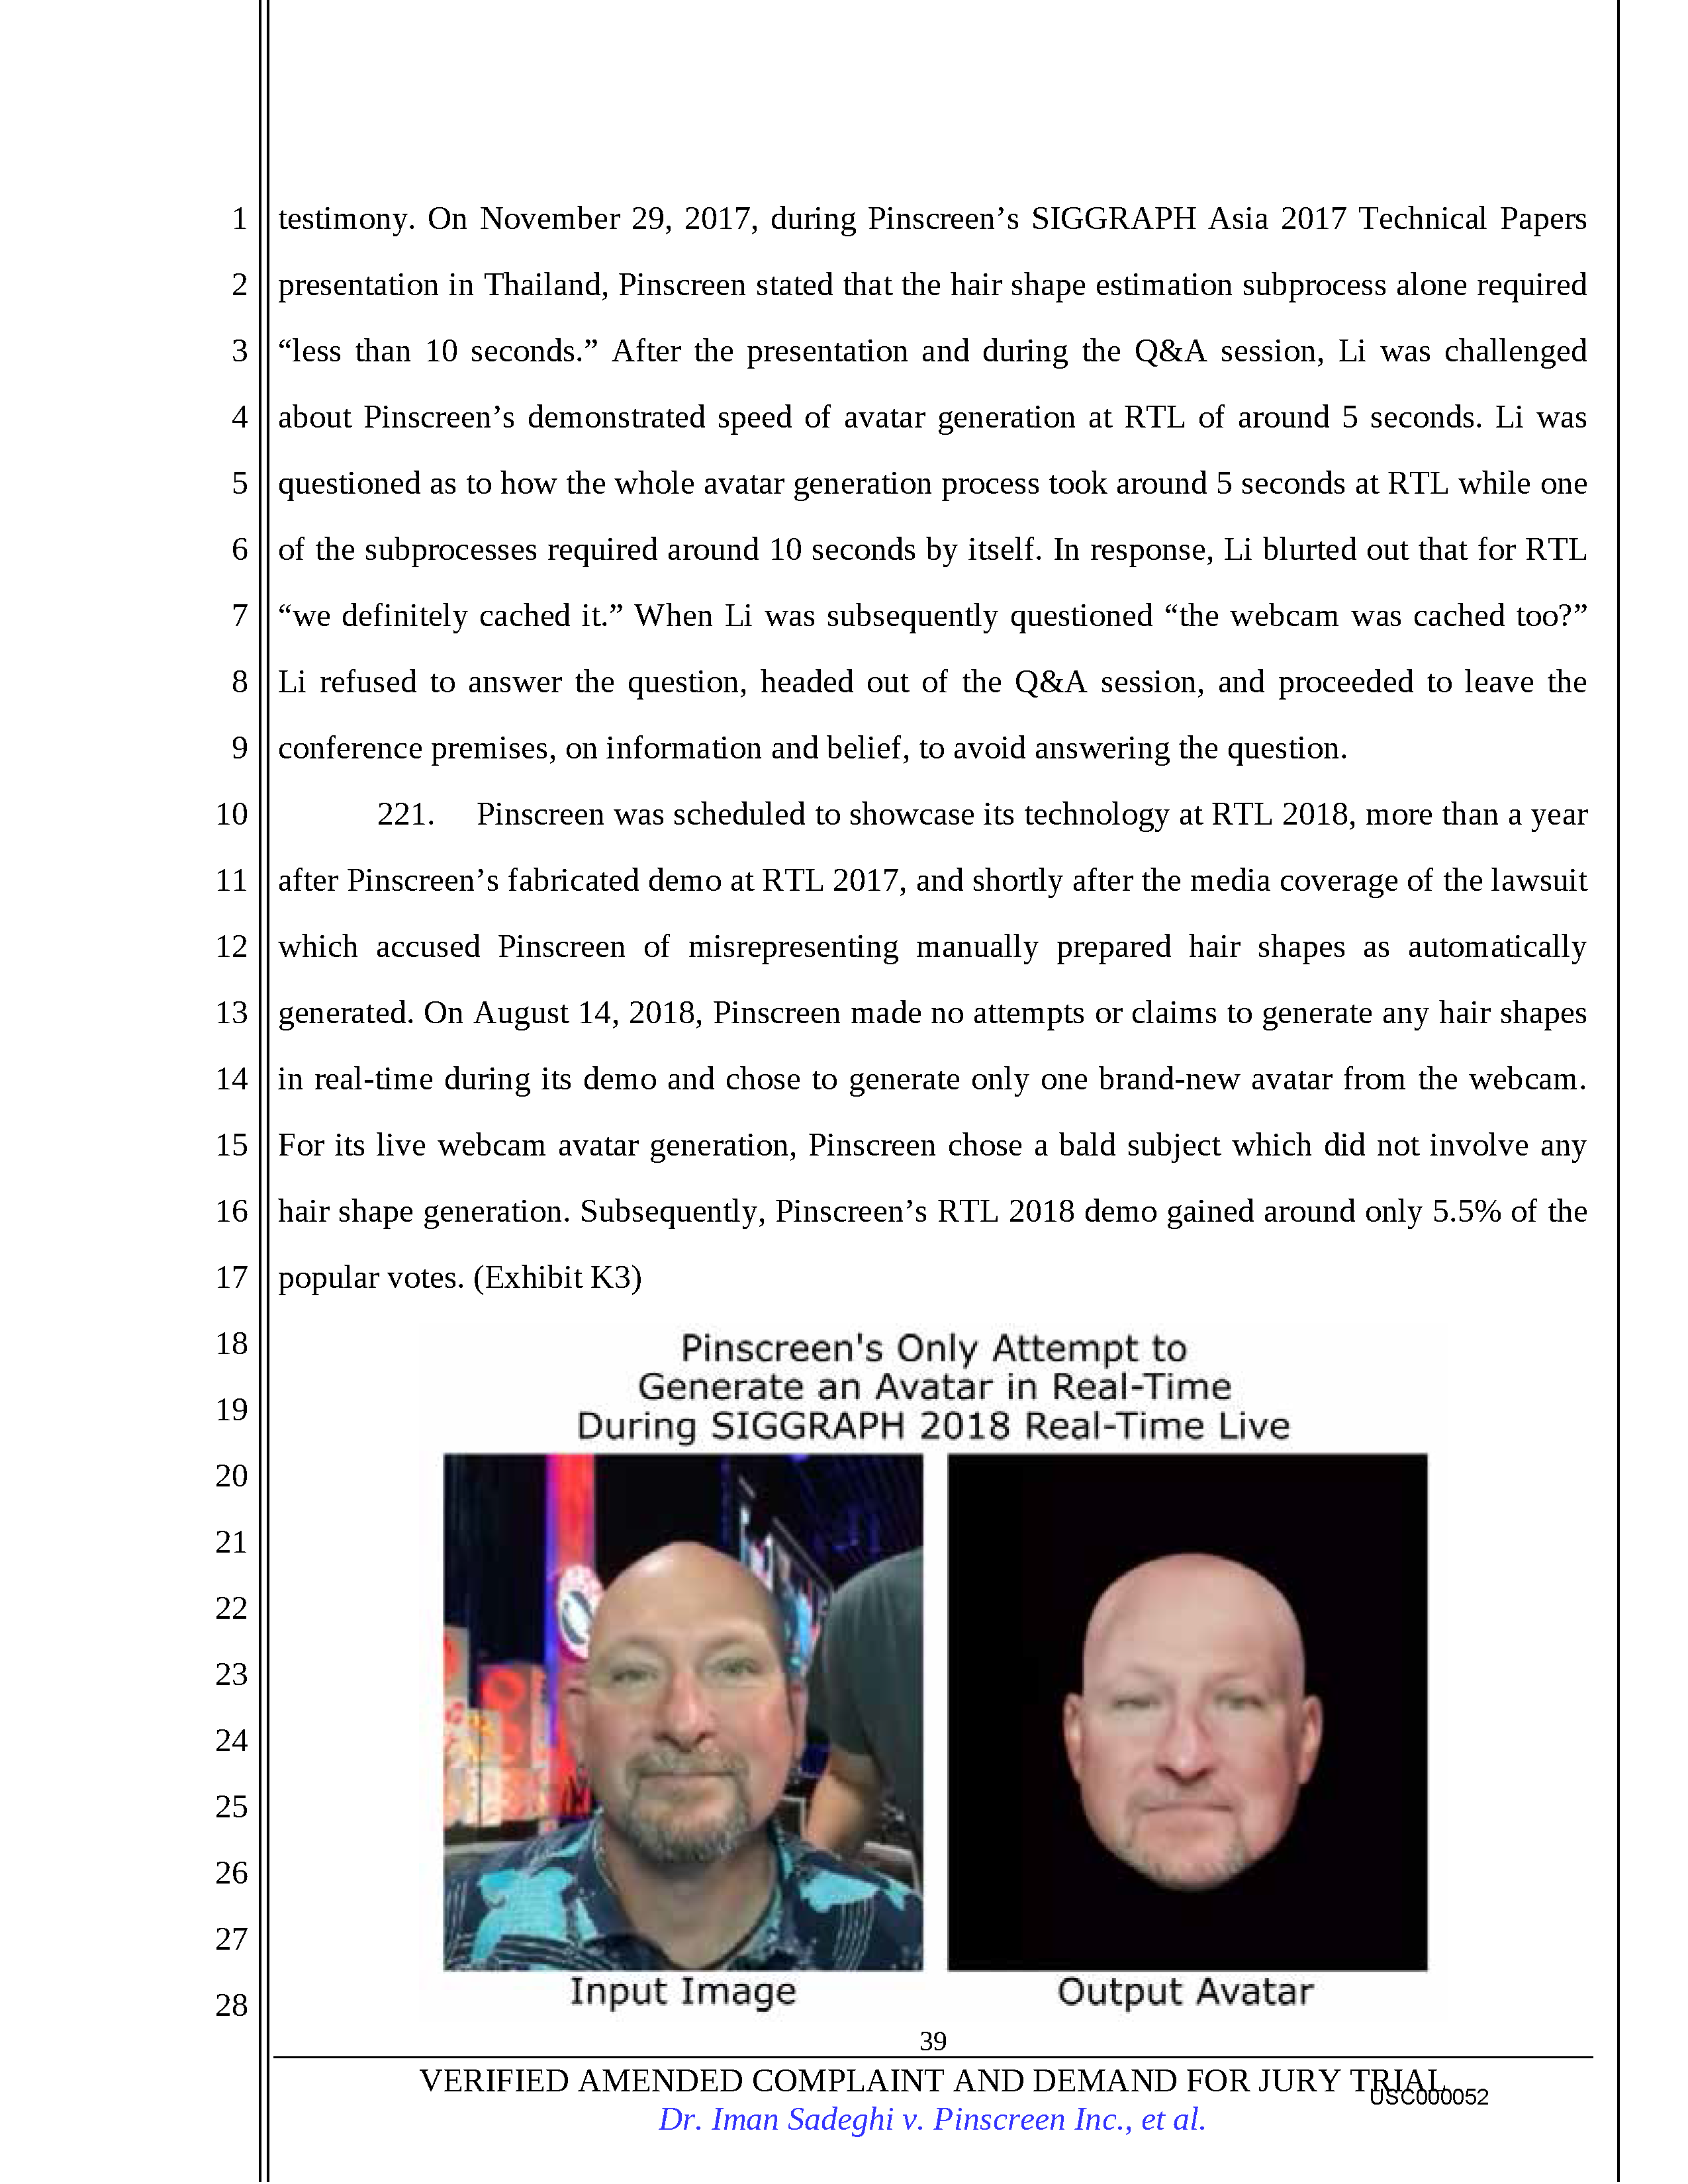 USC's Investigation Report re Hao Li's and Pinscreen's Scientific Misconduct at ACM SIGGRAPH RTL 2017 Page 54